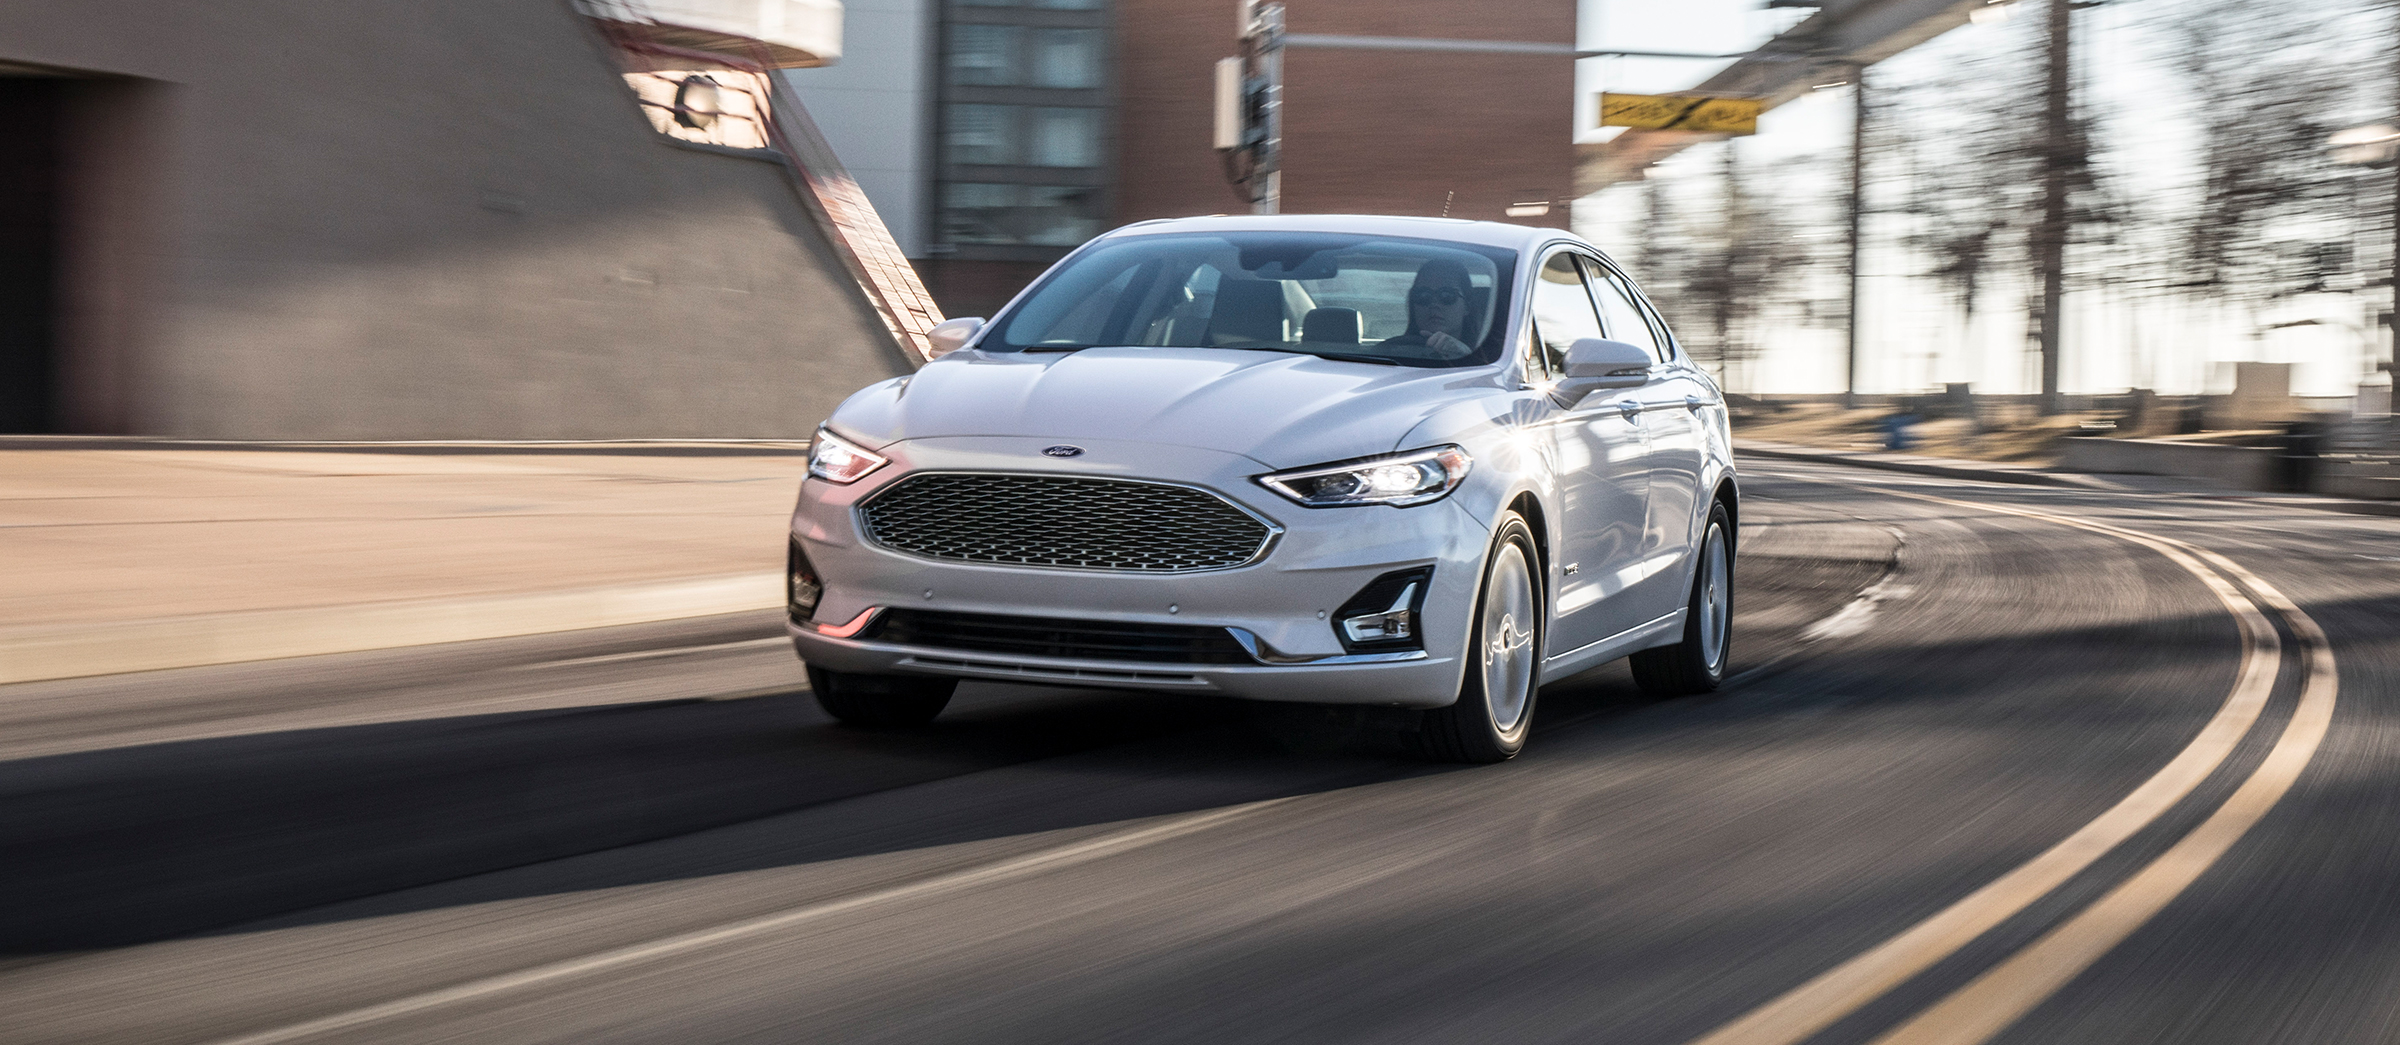 4 Common Problems That You Should Know Before Buying a Used Ford Fusion